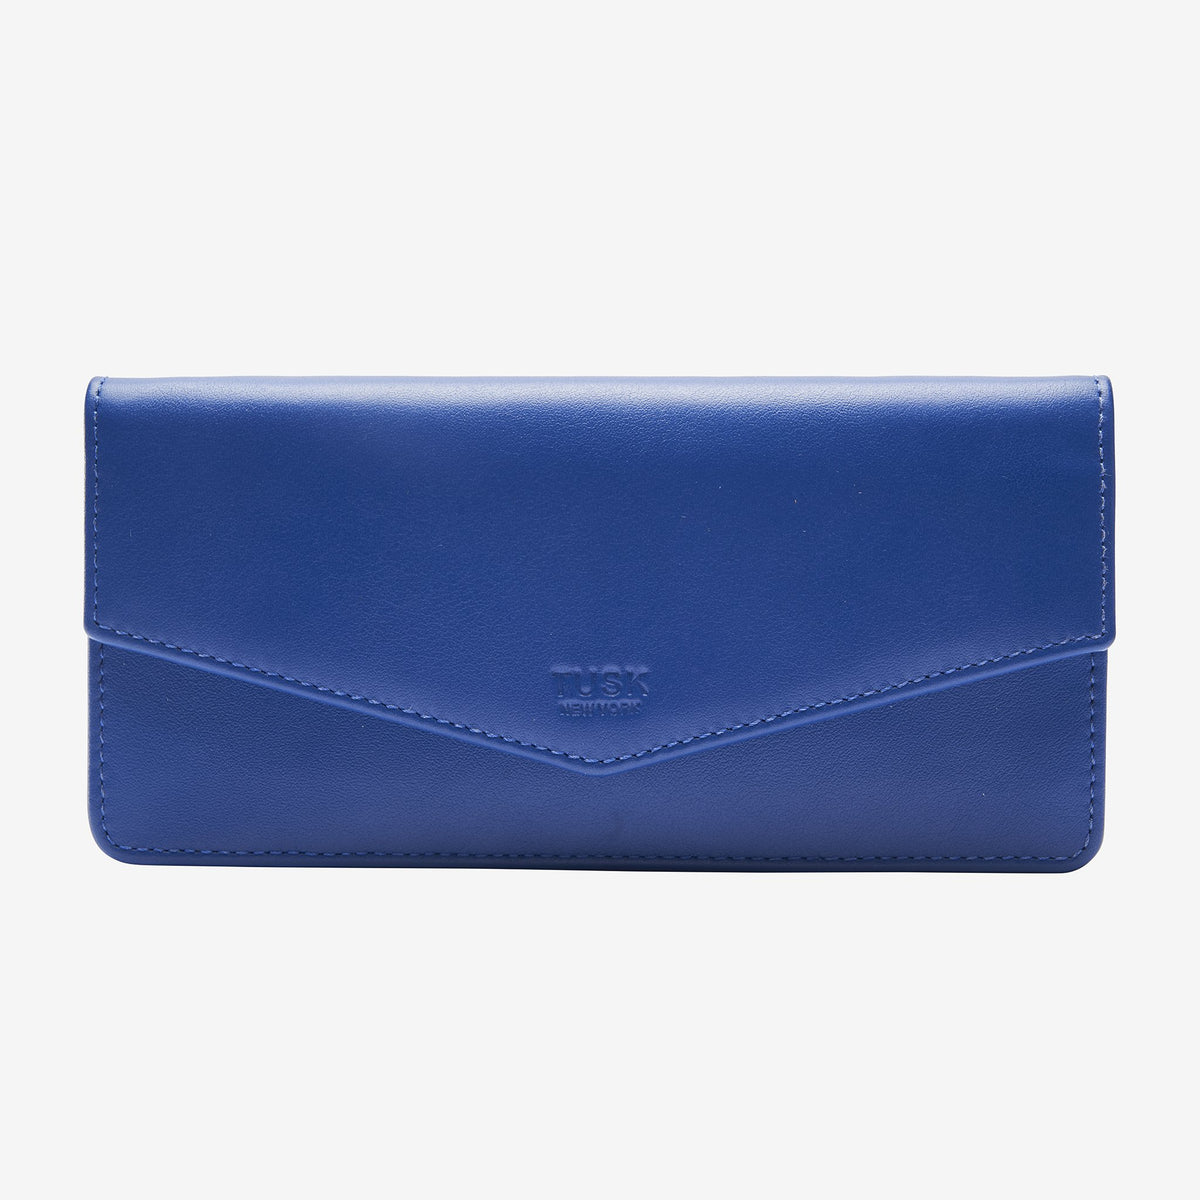 tusk-434-leather-clutch-wallet-iris-front